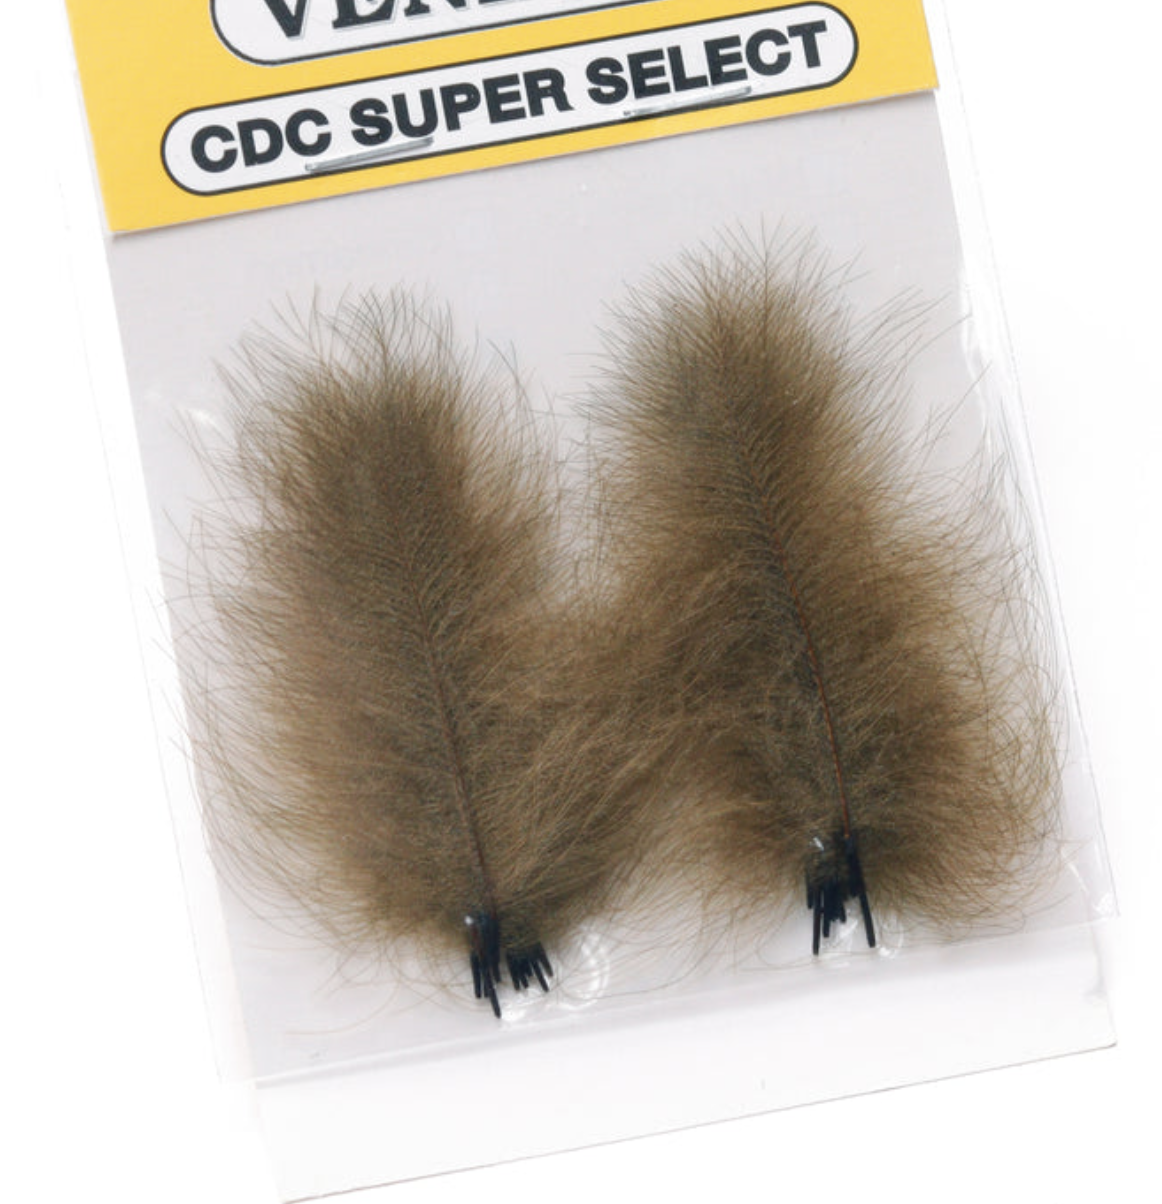 Super select CDC - Brown olive